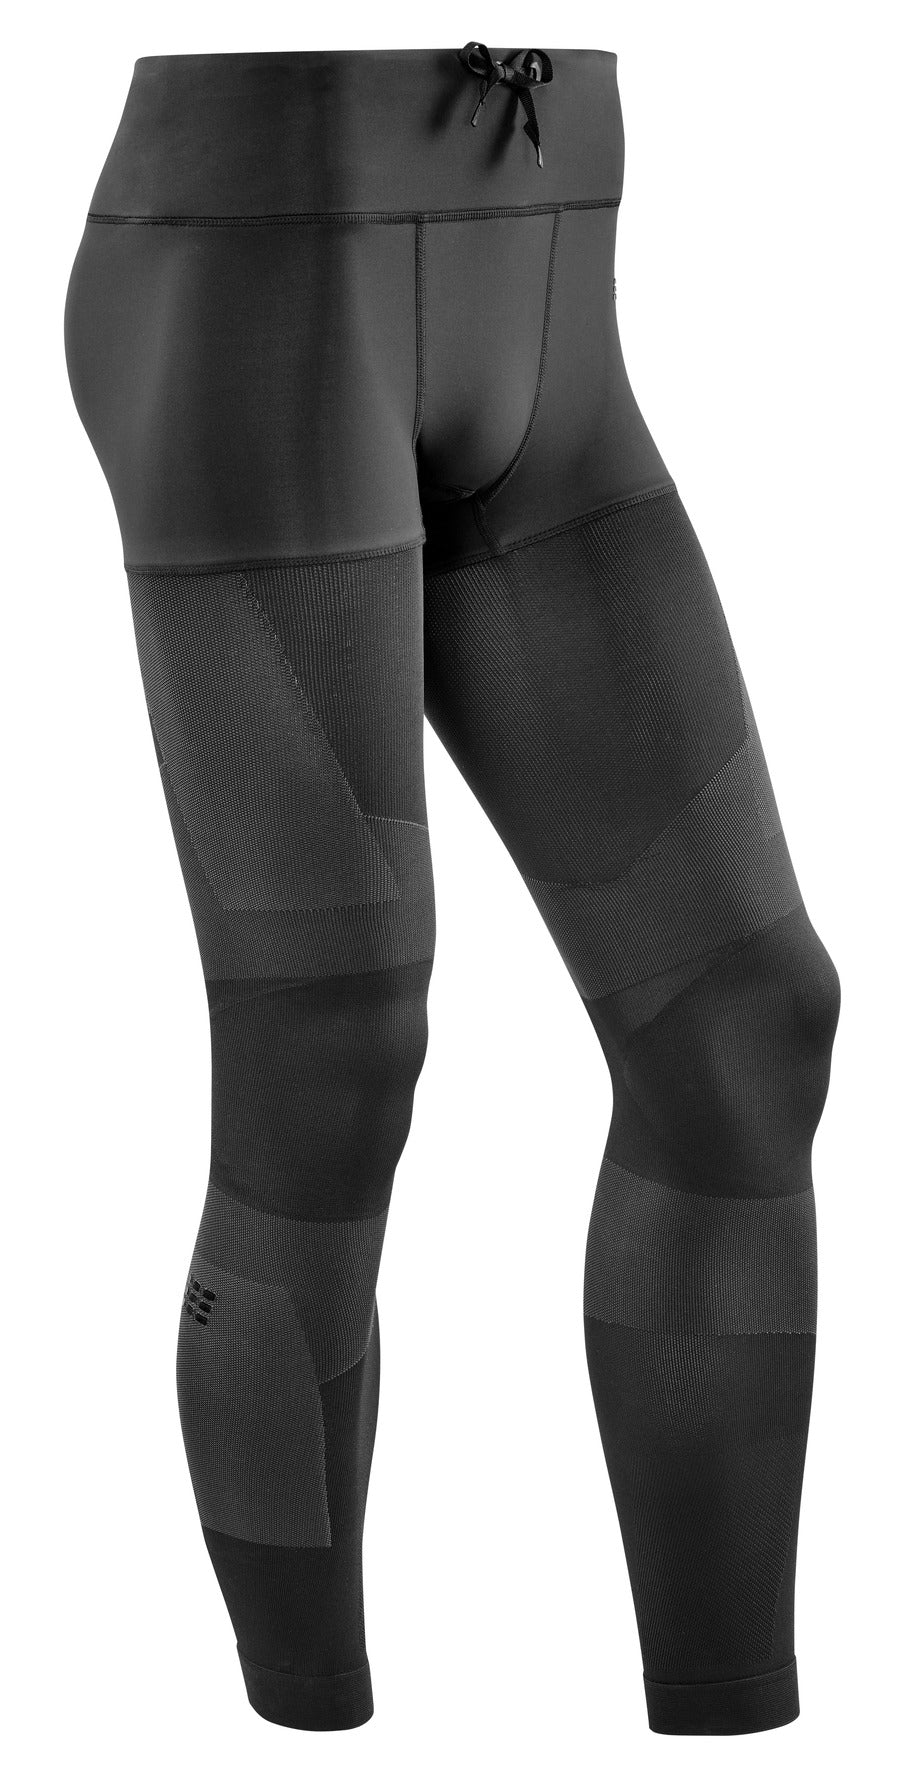 Compression tights for men & women